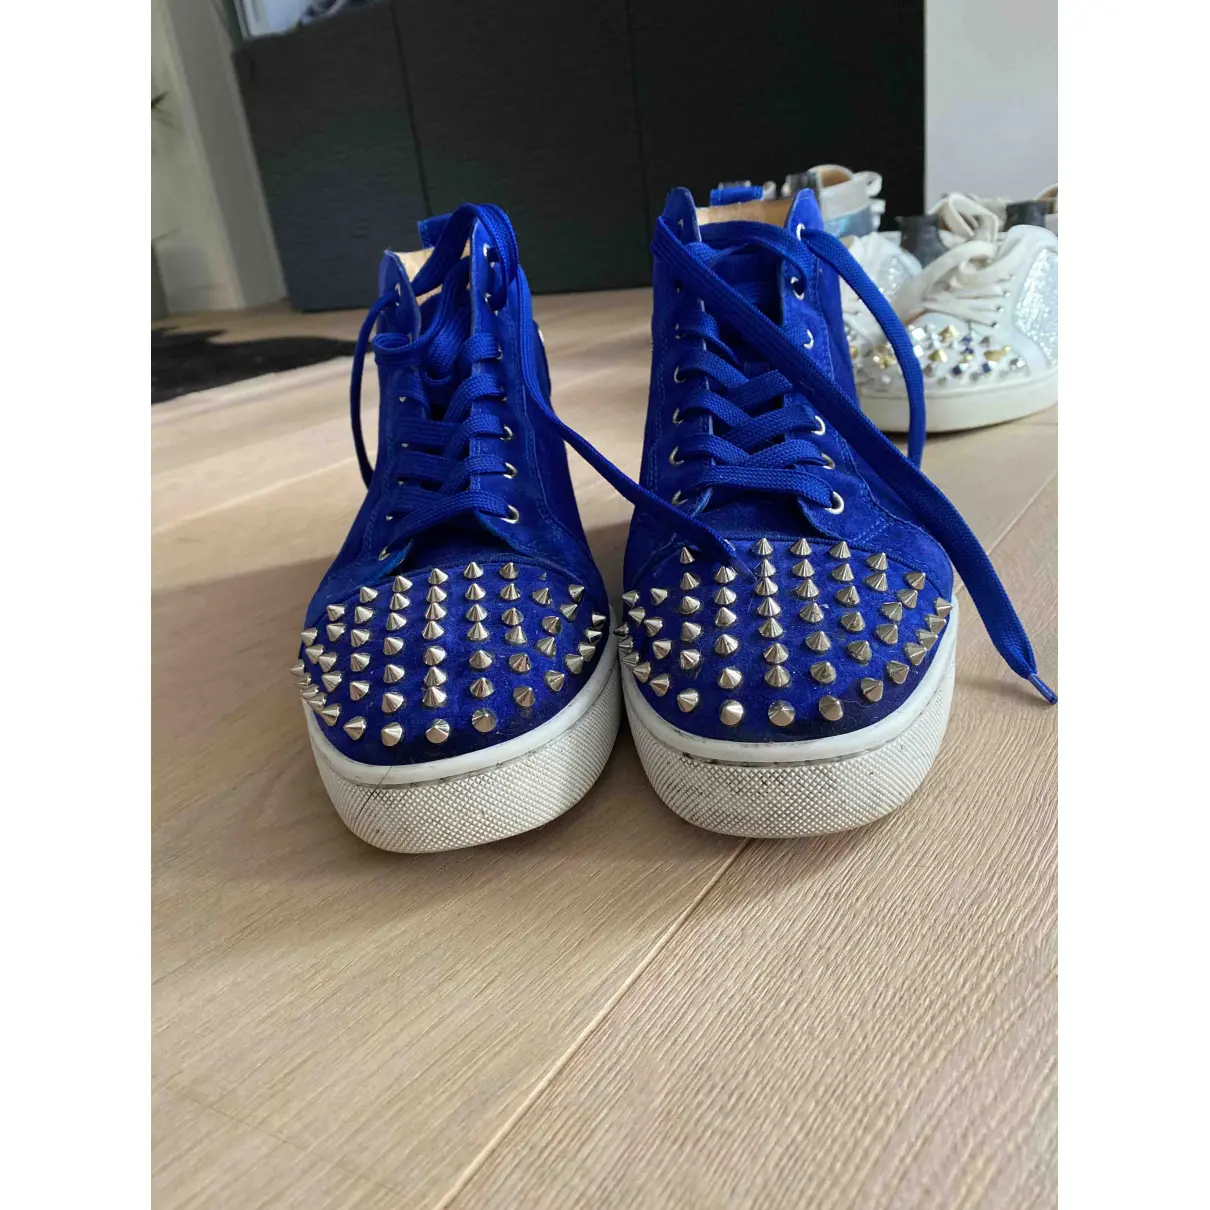 Buy Christian Louboutin Louis high trainers online